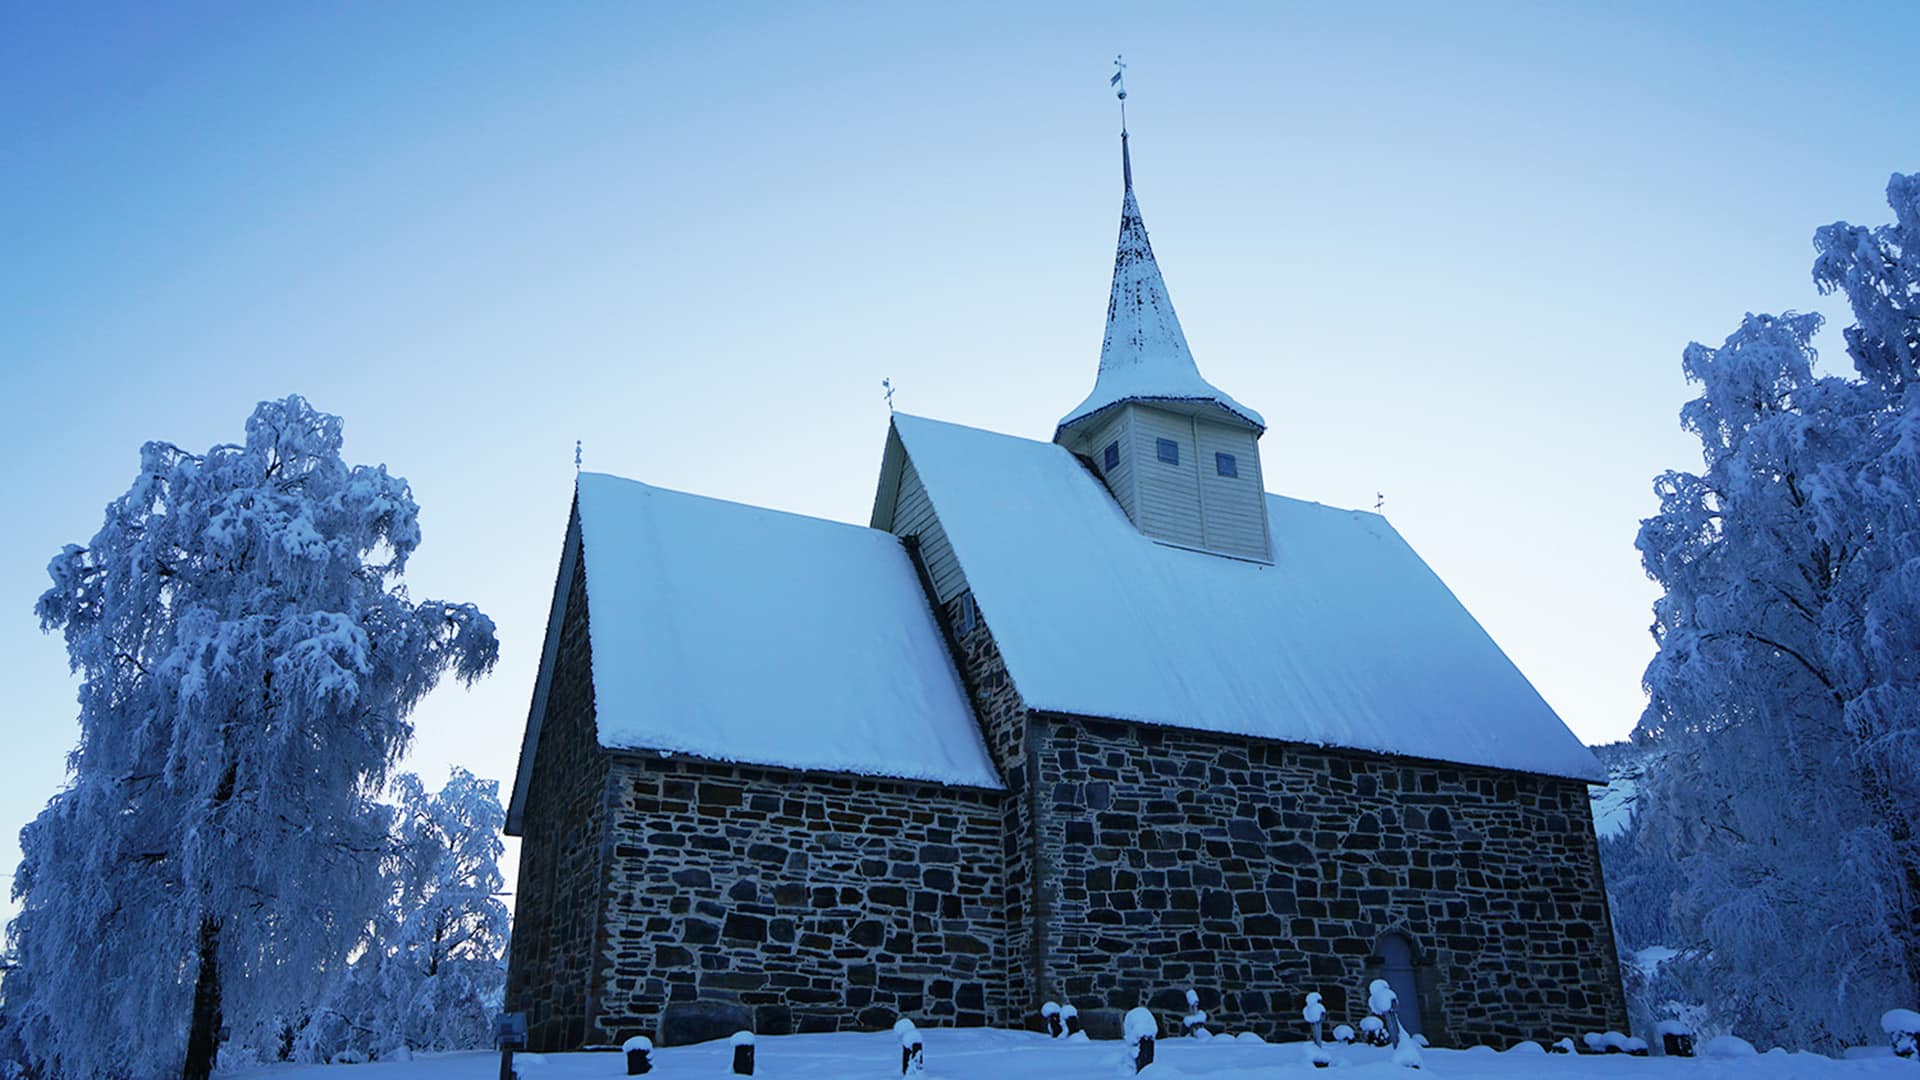 The medieval church of Slidredomen with a snow covered roof in wintertime.